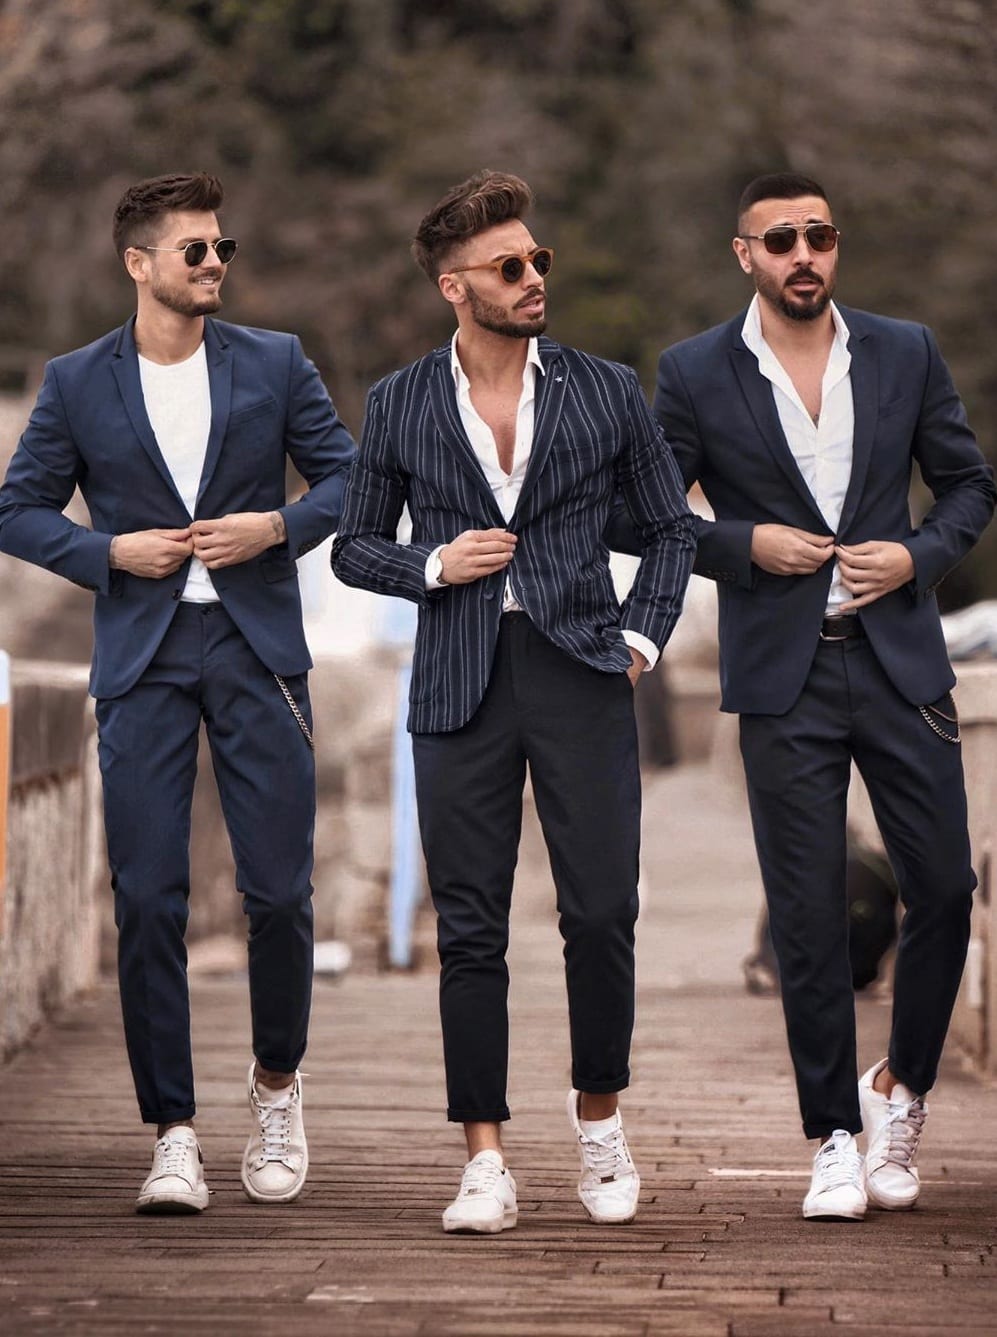 Matching Suit Outfits for Men's Street Style